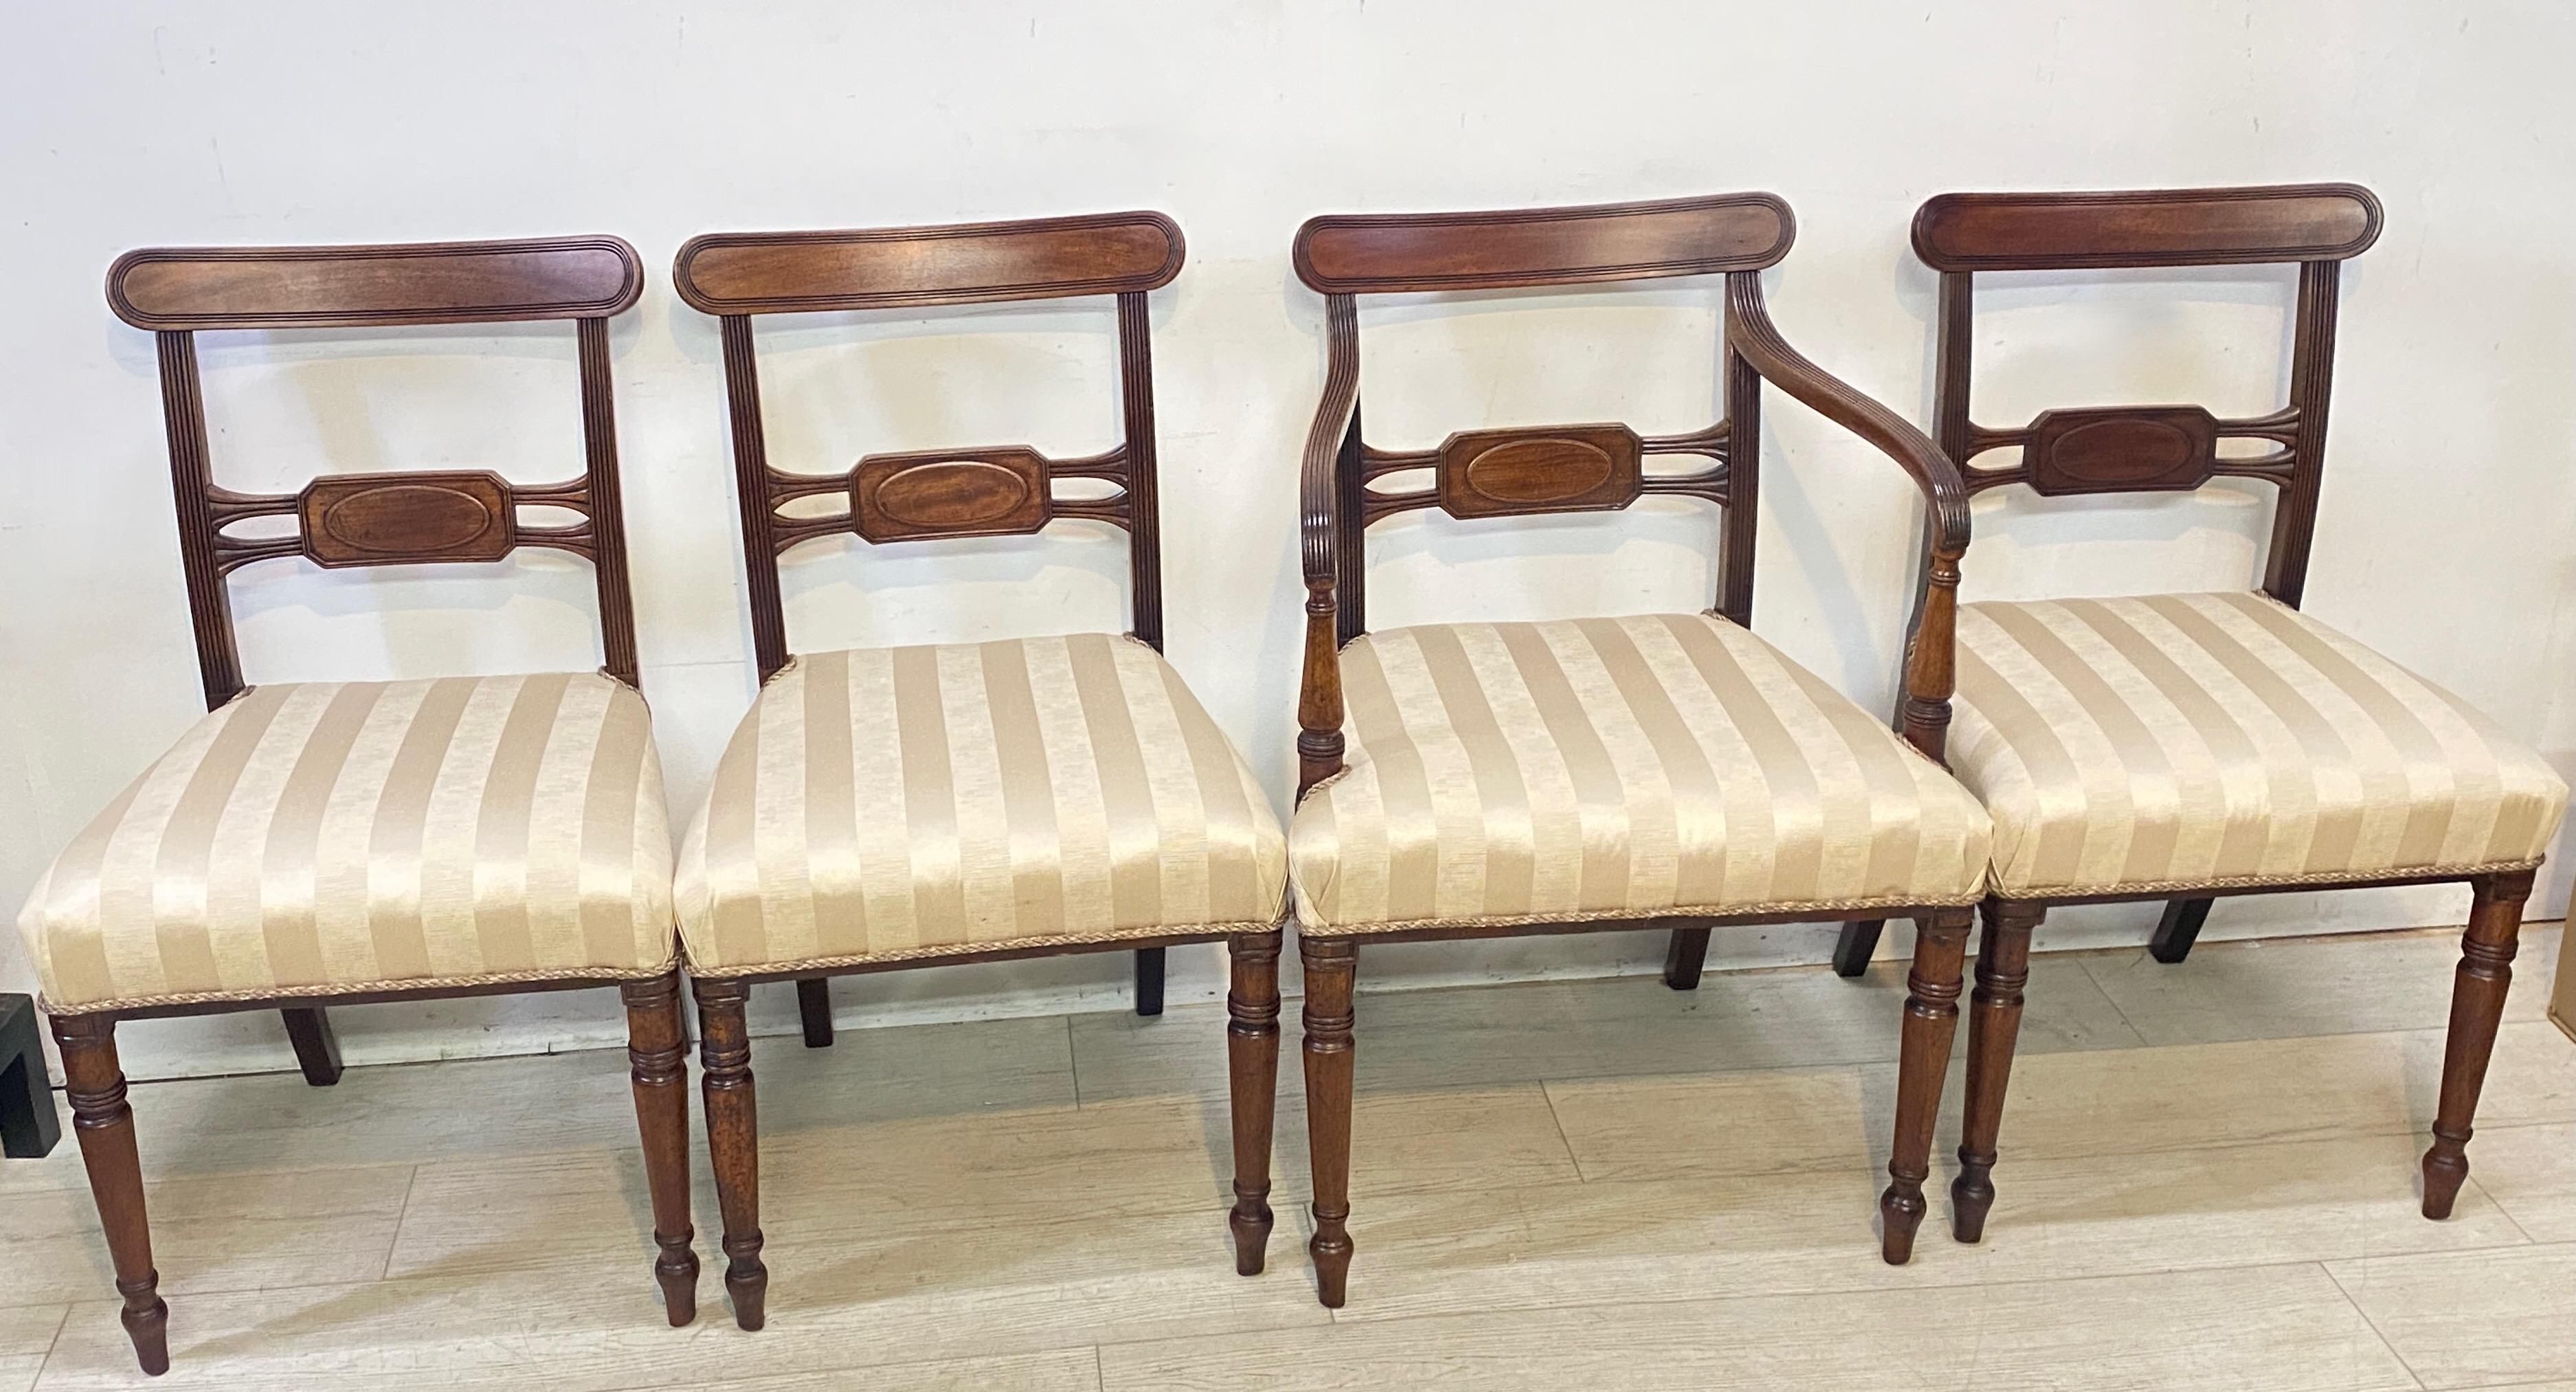 Set of 4 Early 19th Century English Regency Mahogany Dining Chairs, circa 1820 For Sale 4